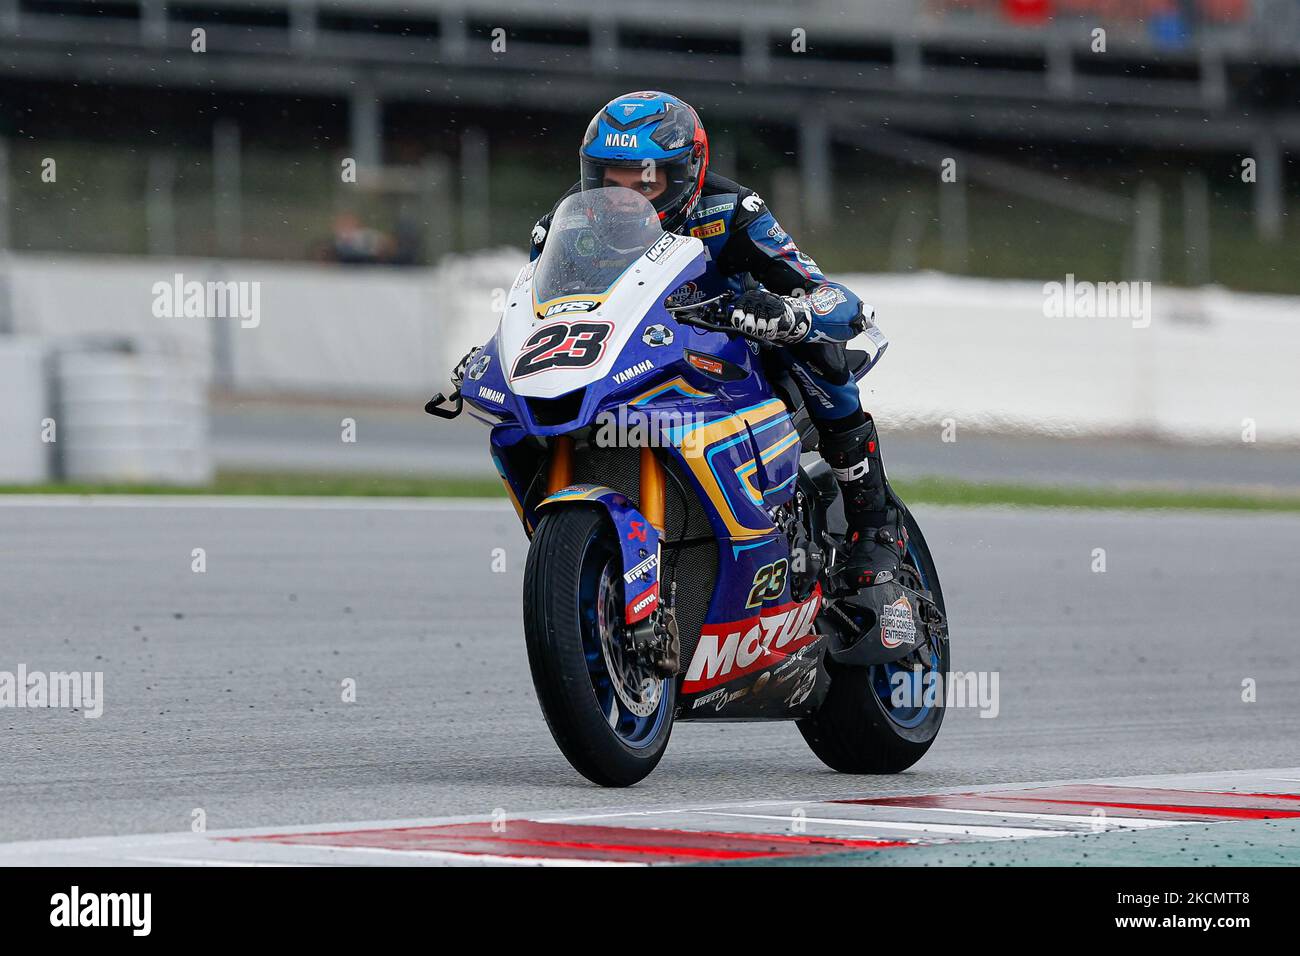 Christophe Ponsson of Gil Motor Sport ? Yamaha with Yamaha YZF R1 during the Race 1 of Hyundai N Catalunya WorldSBK Round of FIM World Superbike Championship at Circuit de Catalunya in Barcelona, Spain. (Photo by DAX Images/NurPhoto) Stock Photo